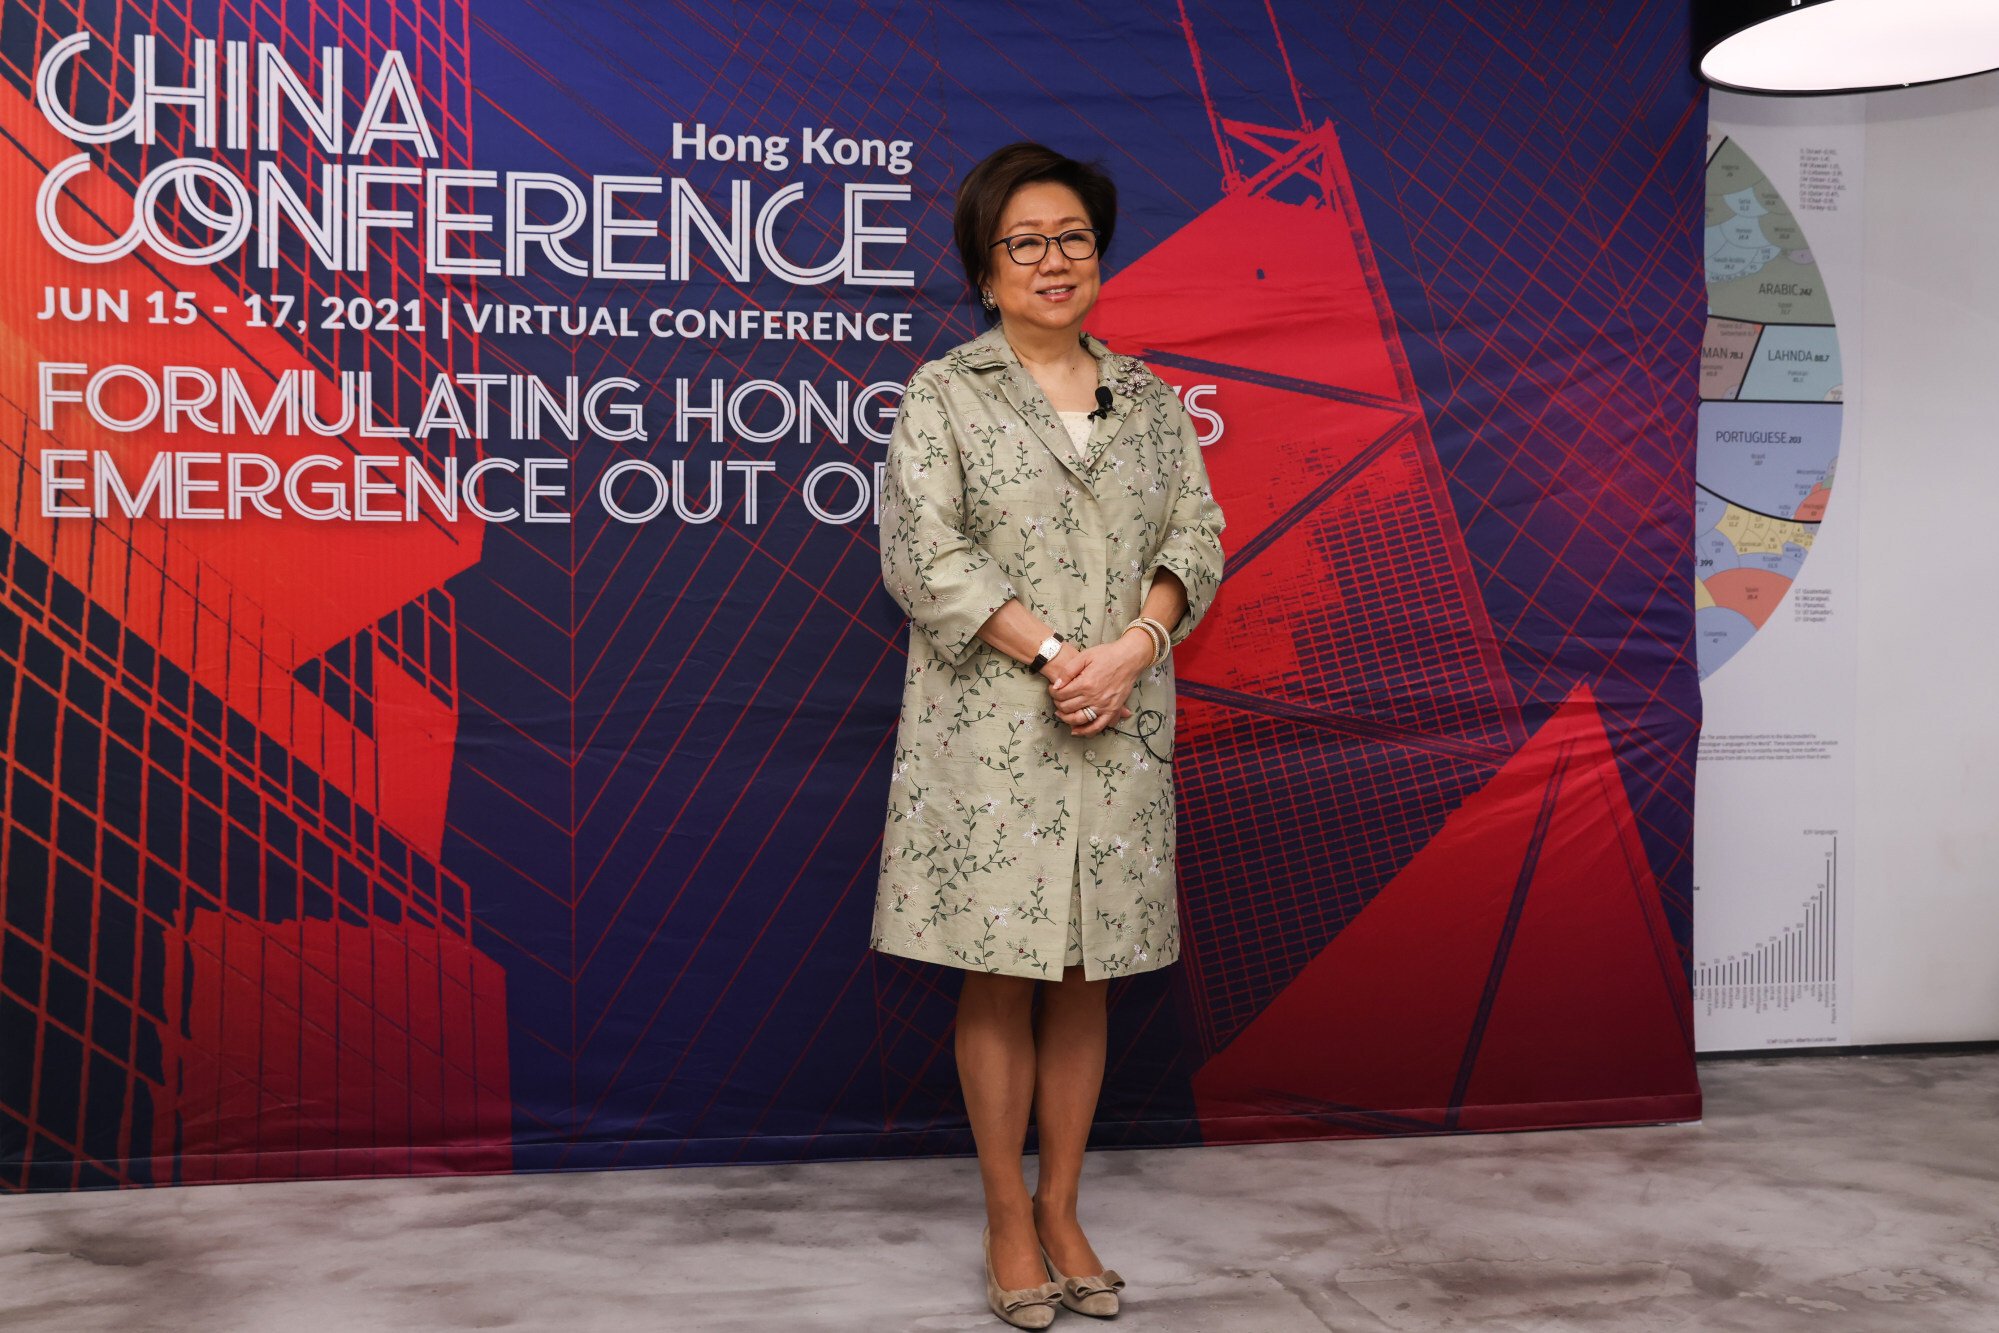 Coronavirus: Hong Kong considering easing quarantine restrictions for the fully vaccinated, commerce chief tells China Conference